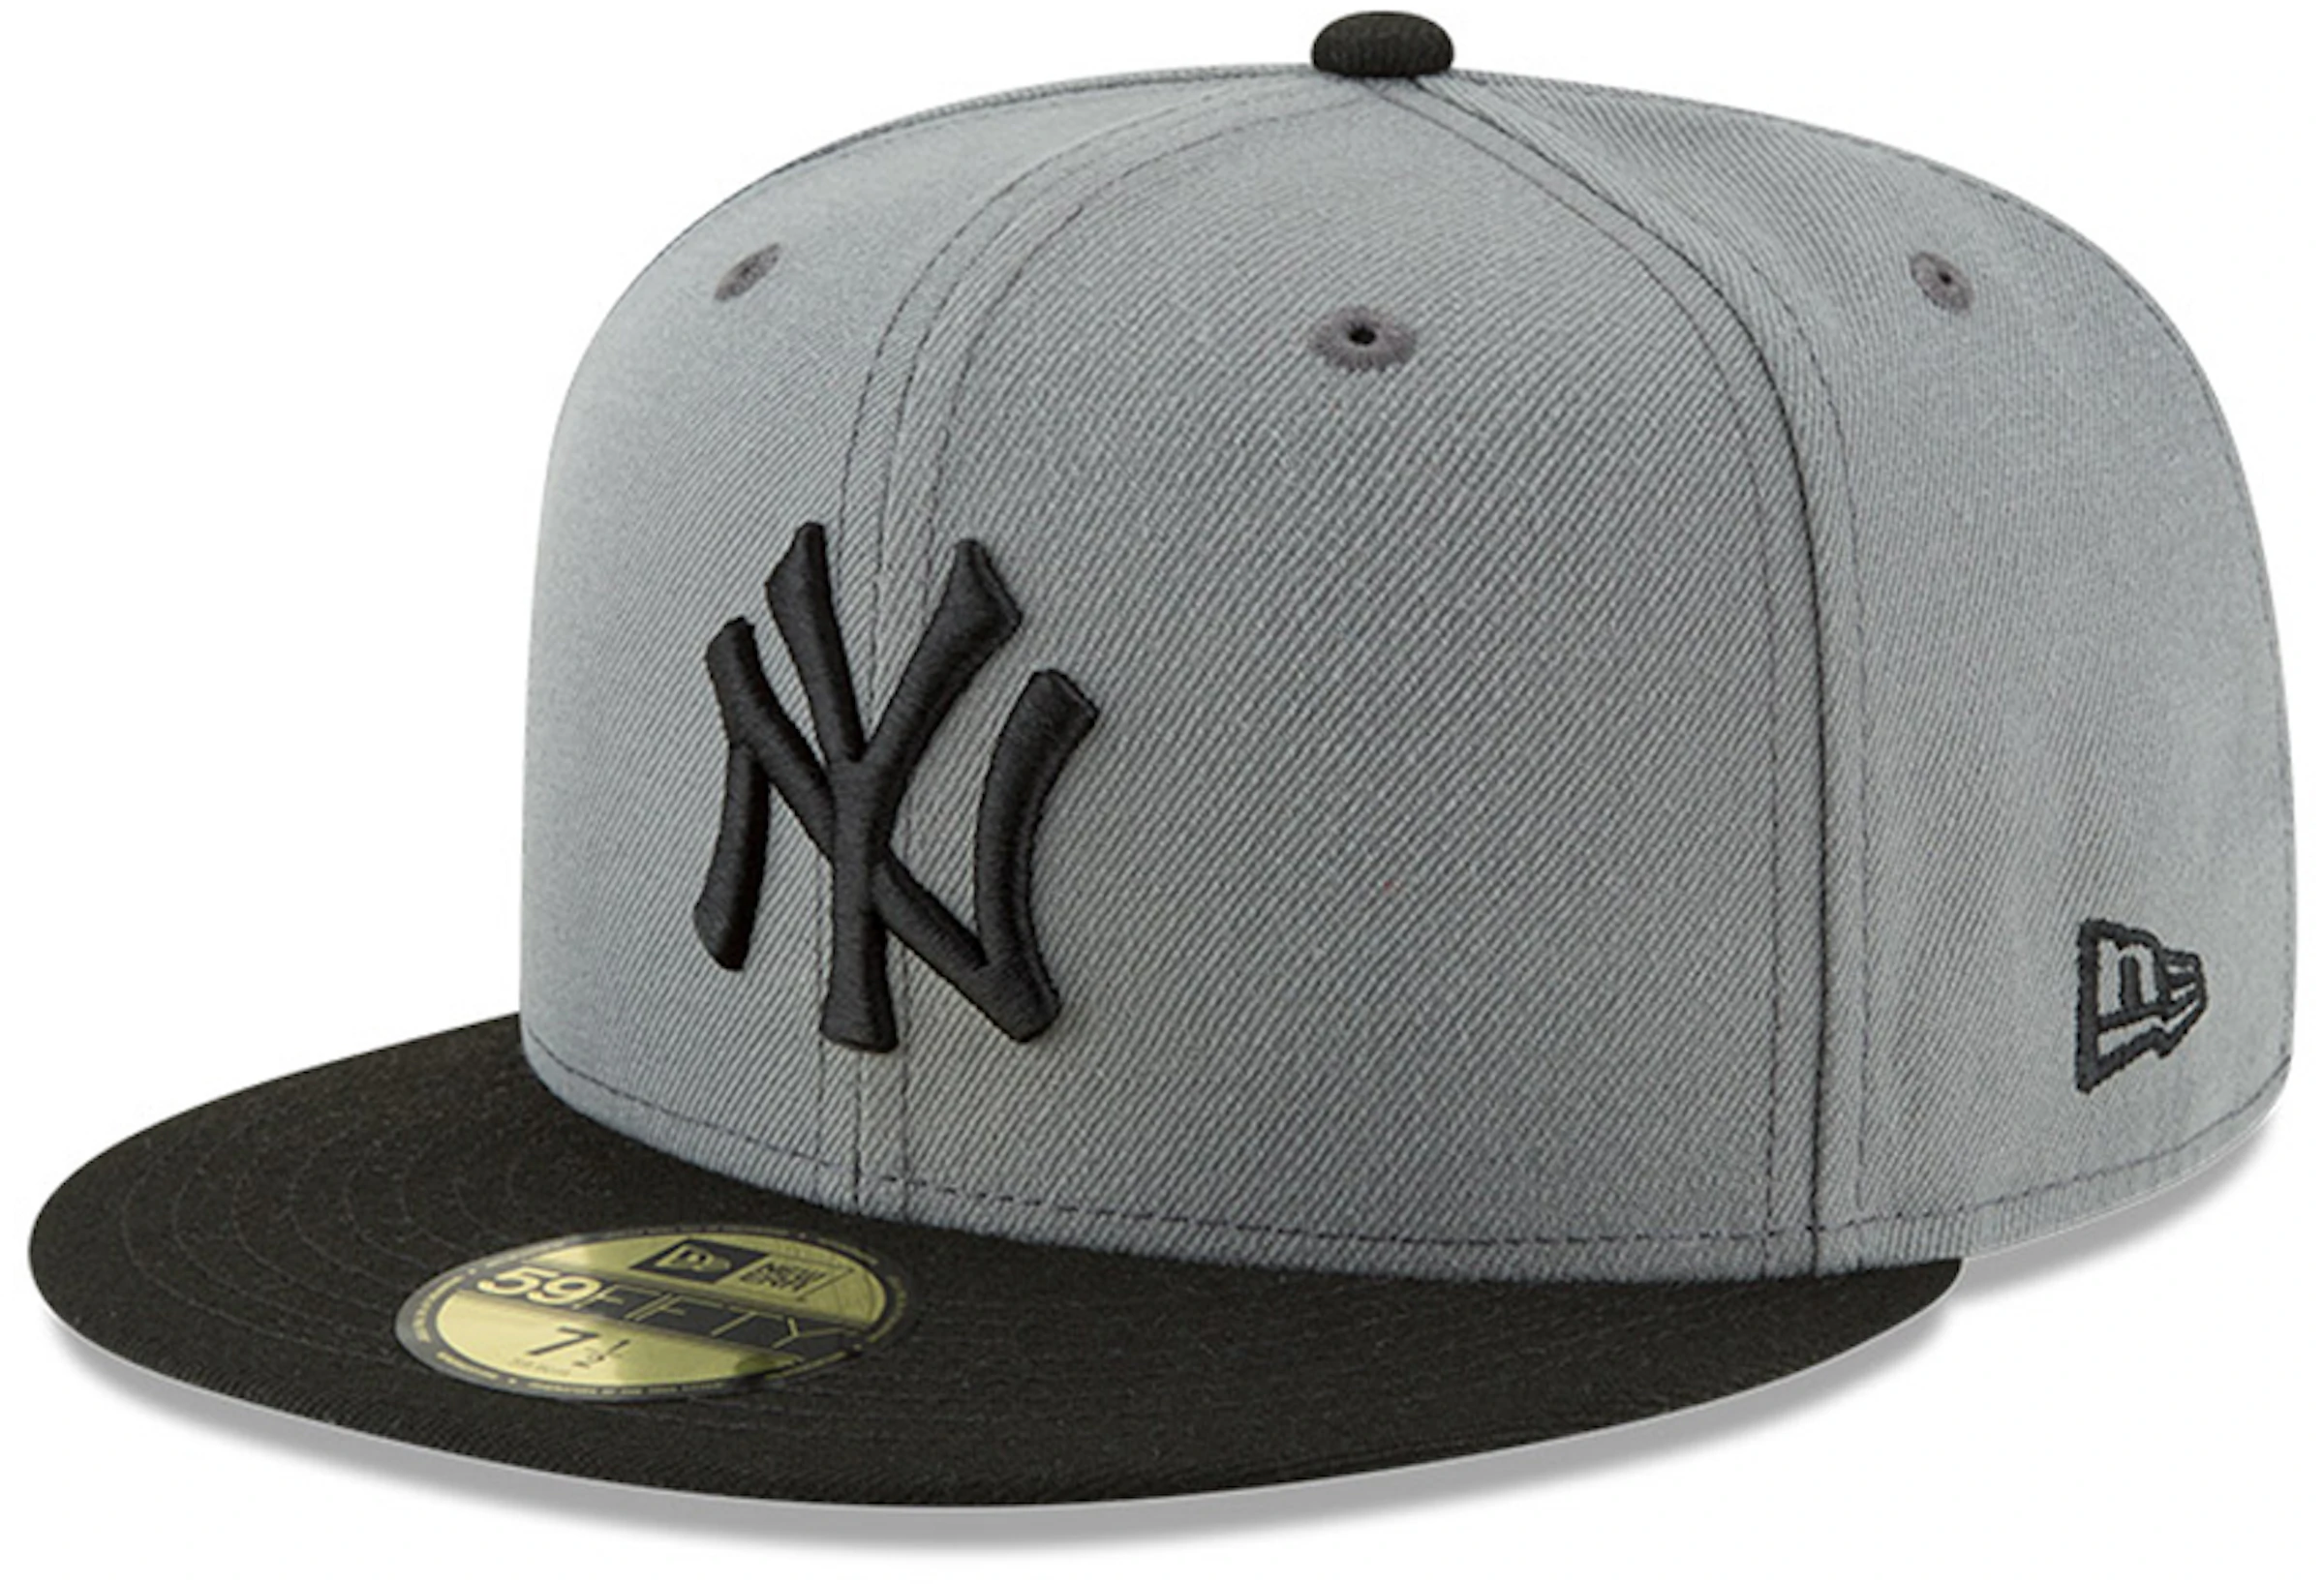 Era New York Fitted 59Fifty Fitted Hat Dark Gray/Black - FW21 - US